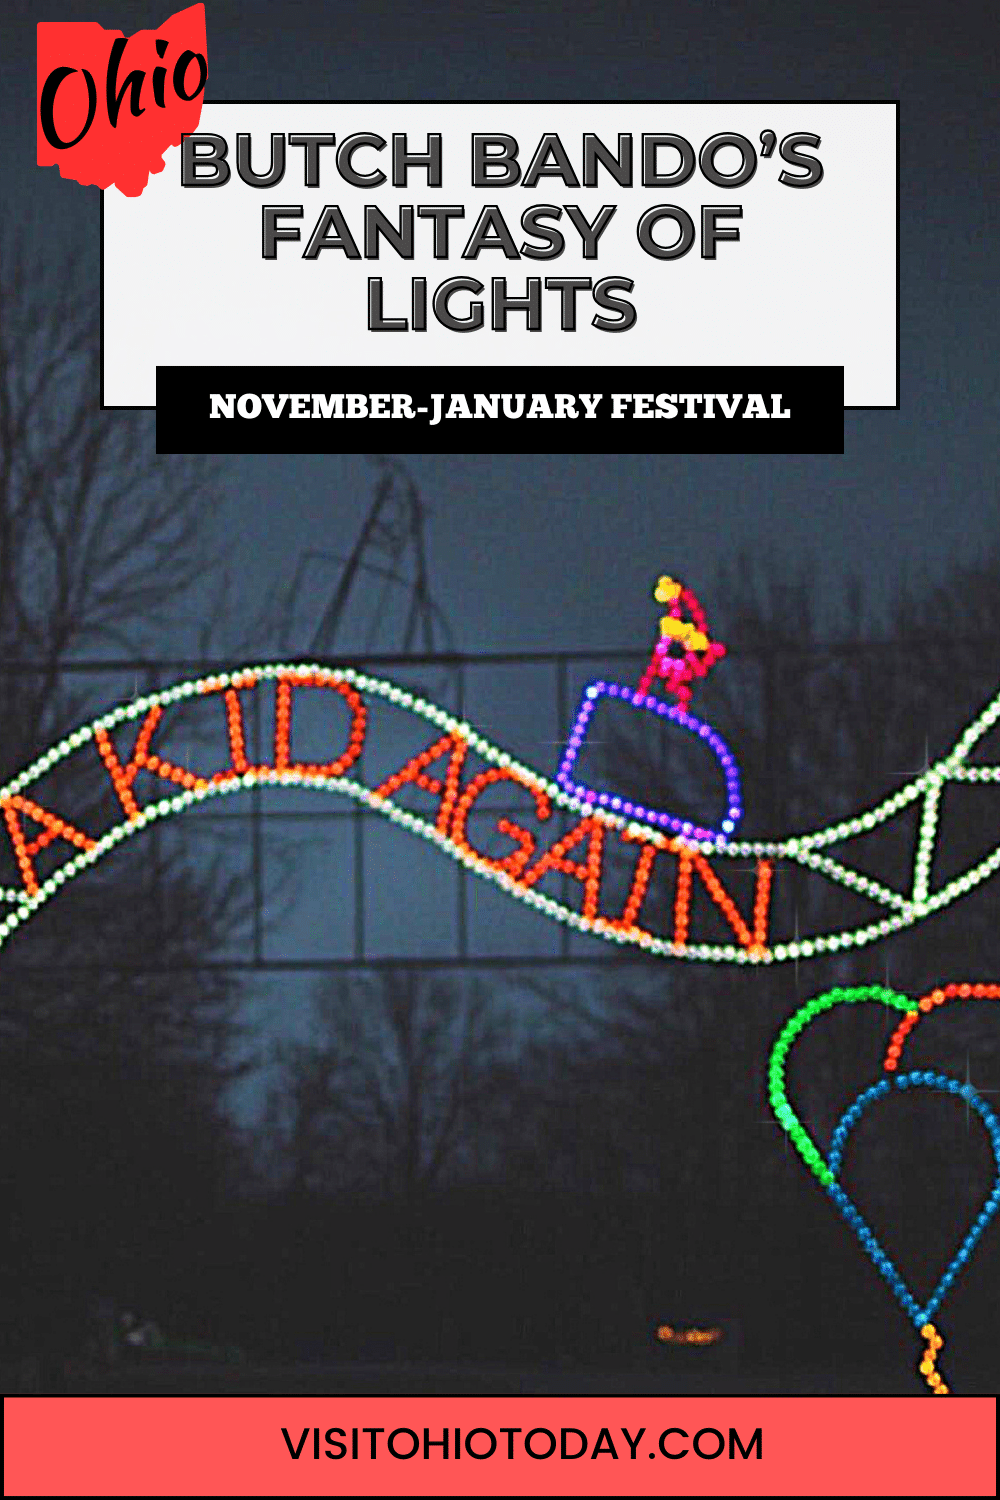 Butch Bando’s Fantasy of Lights is at Alum Creek State Park Campgrounds from November to January.